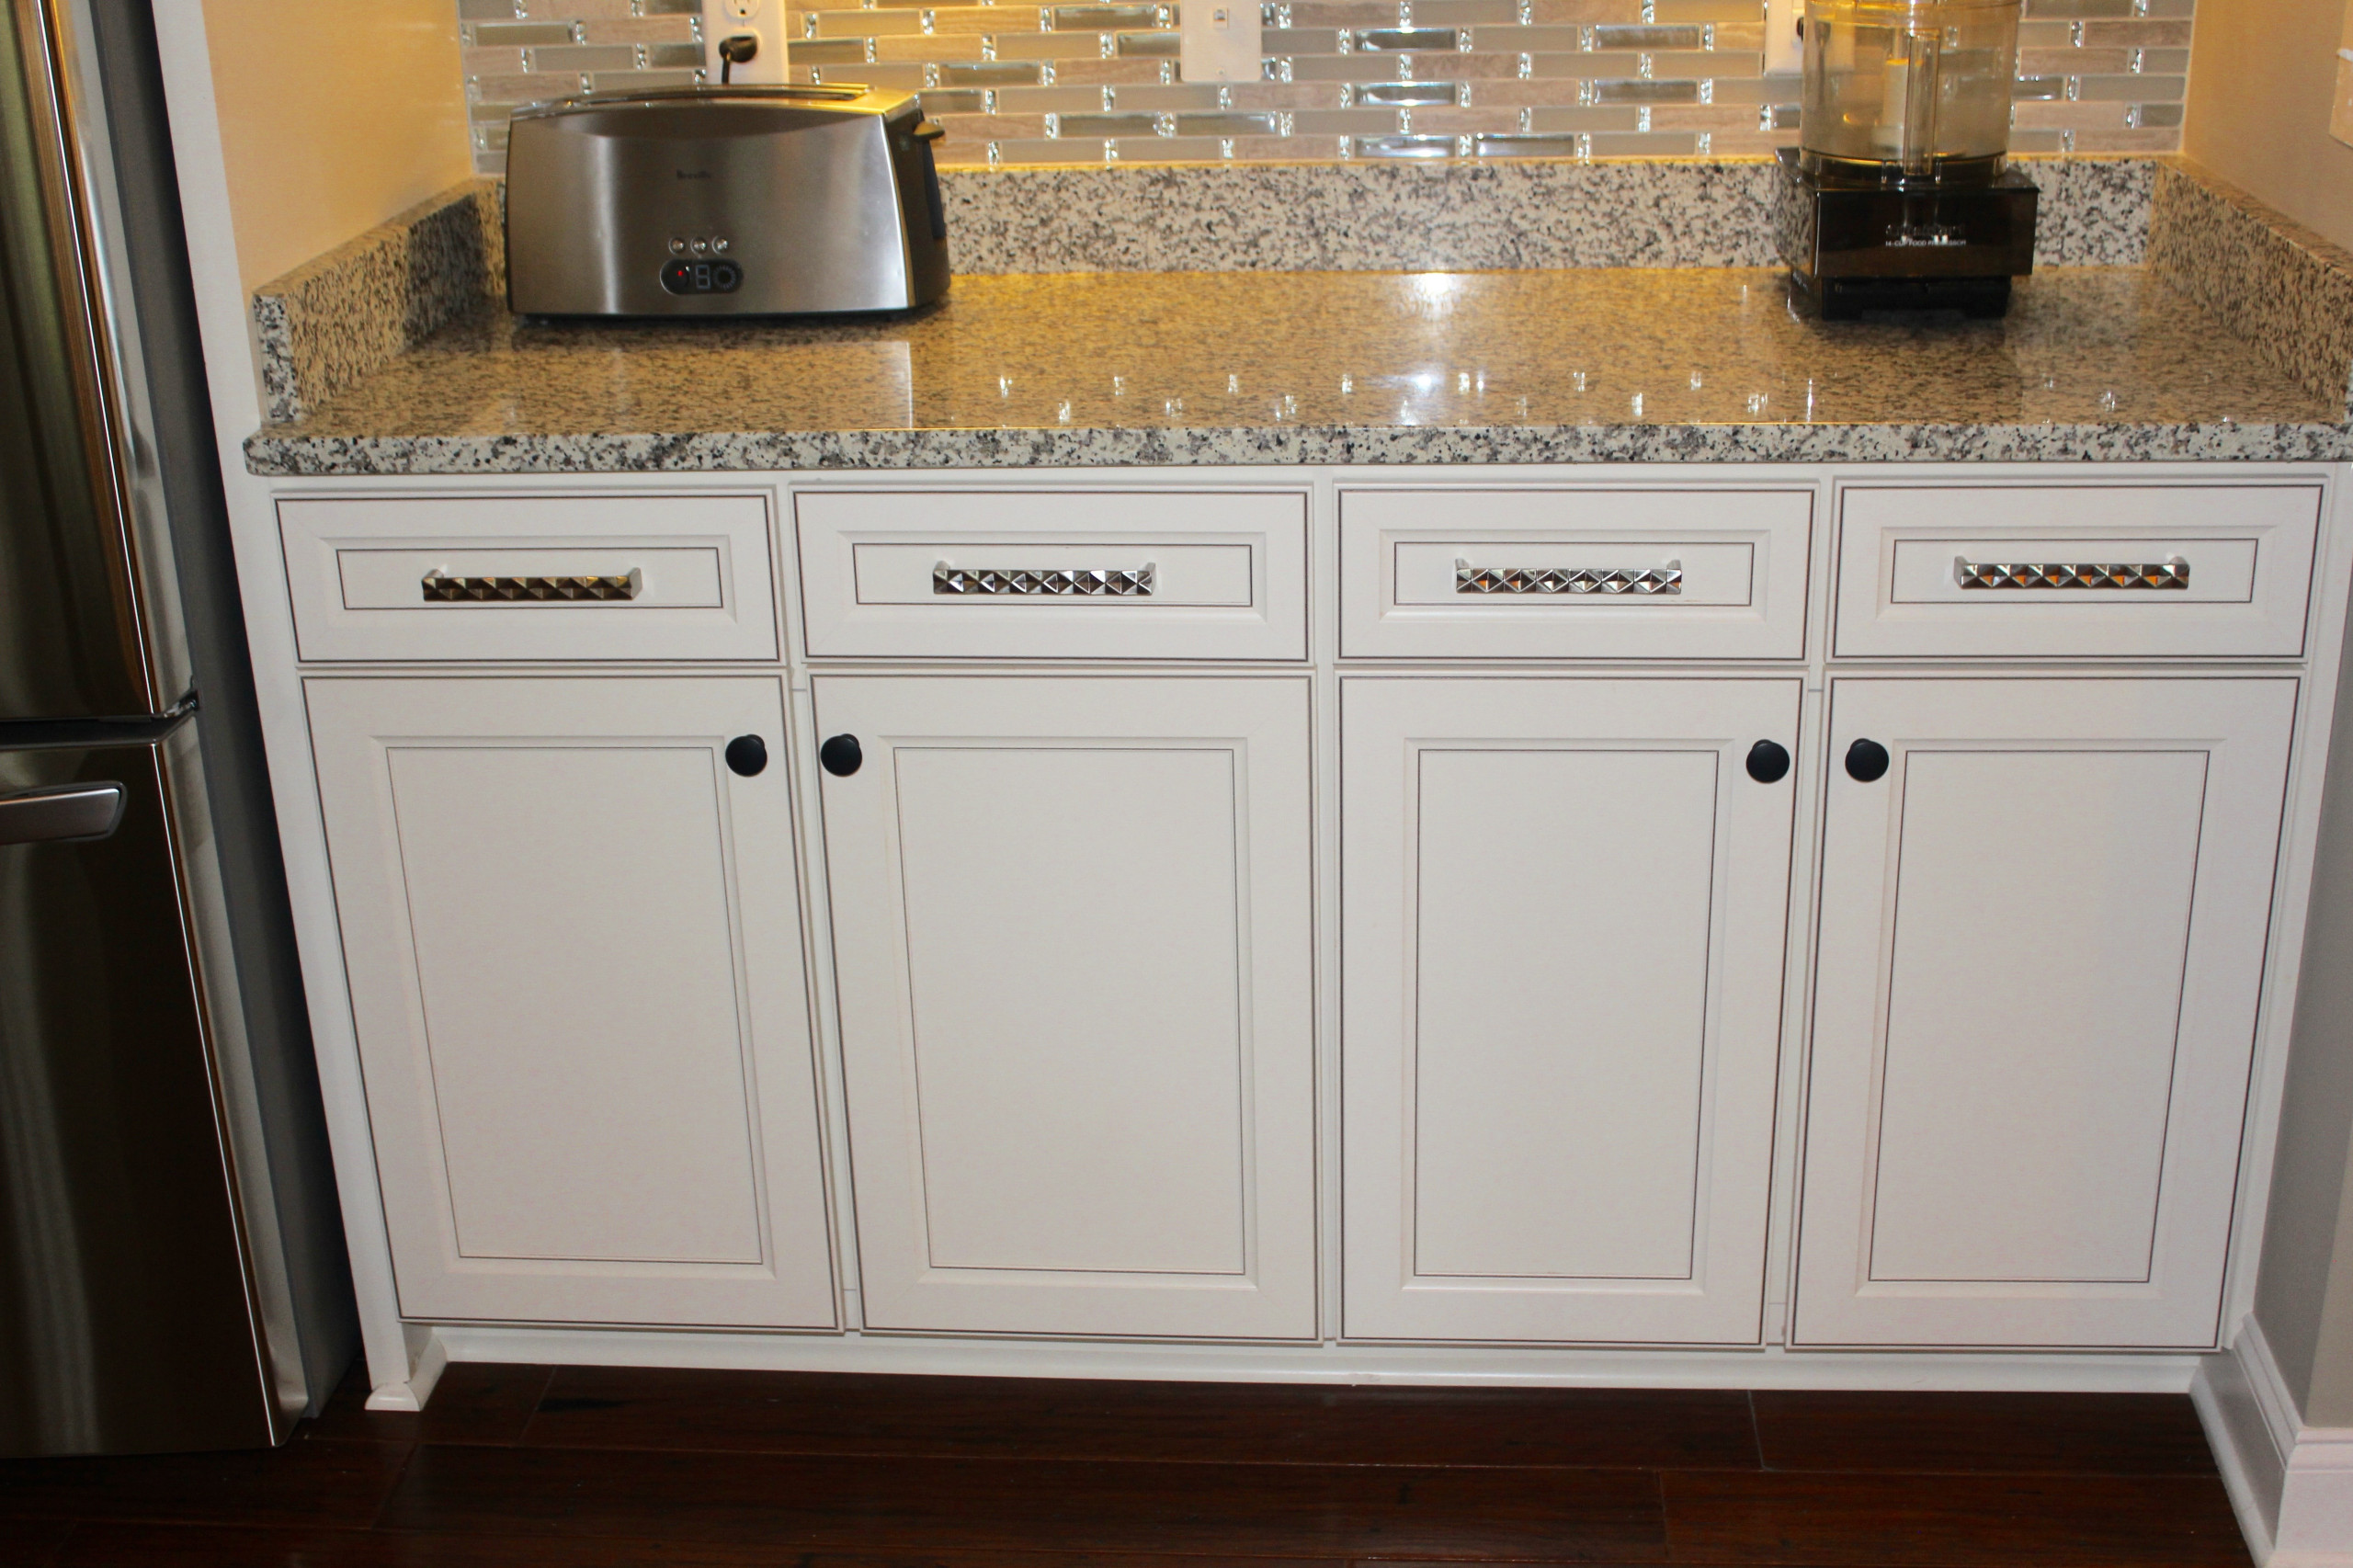 Oversized brushed nickel pulls are combined with black knobs